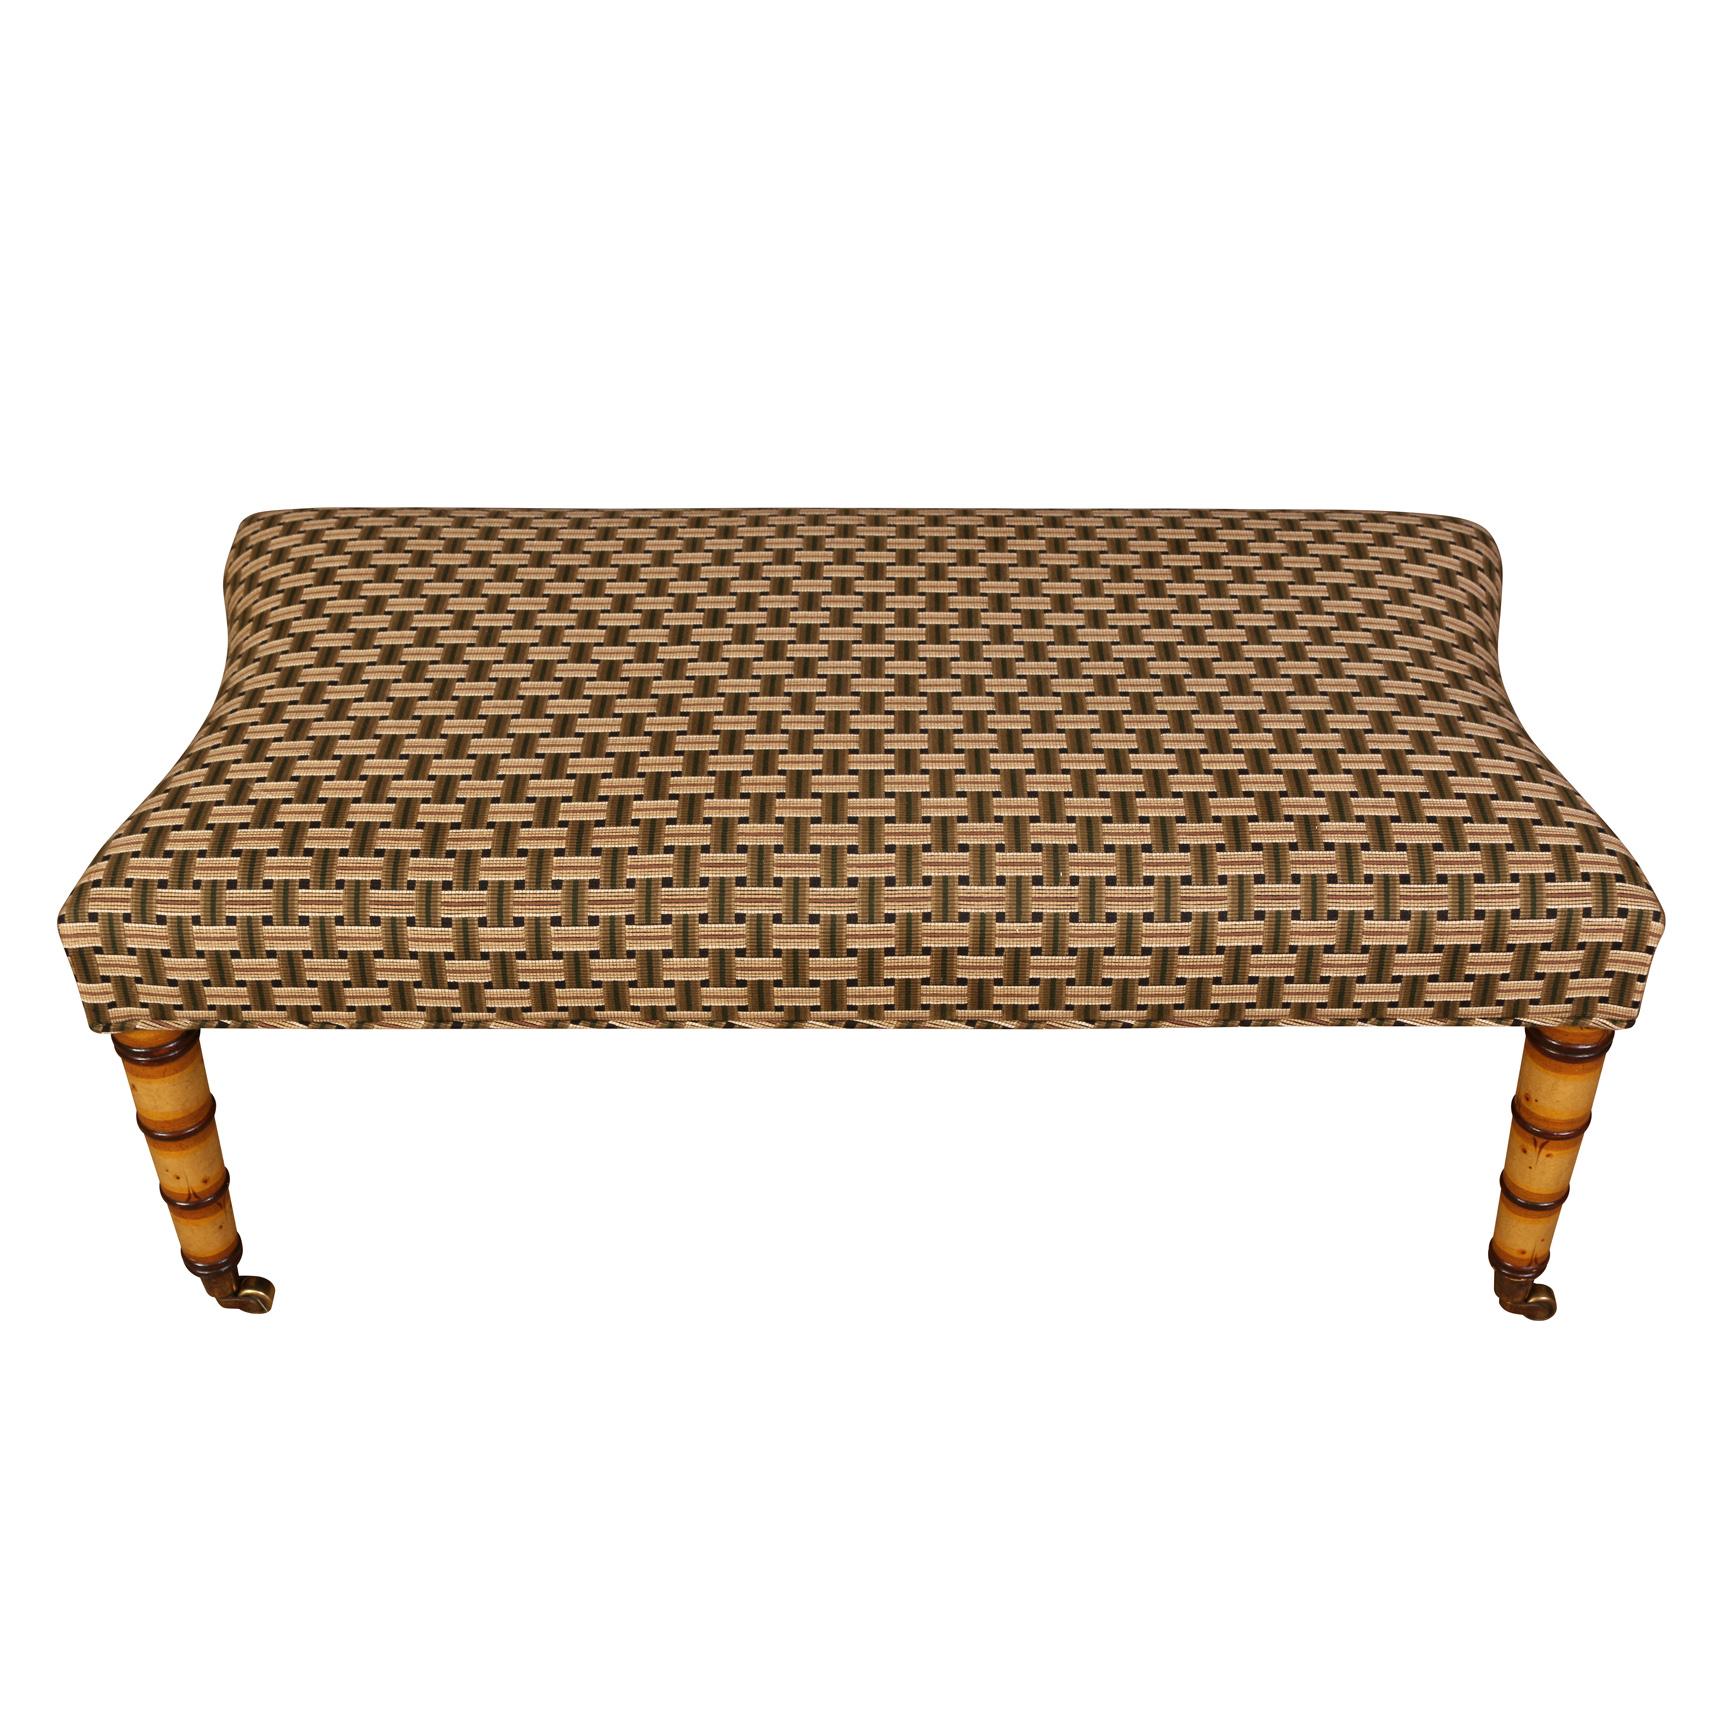 A vintage John Rosselli faux bamboo bench with a basketweave design upholstered seat and casters to the feet.